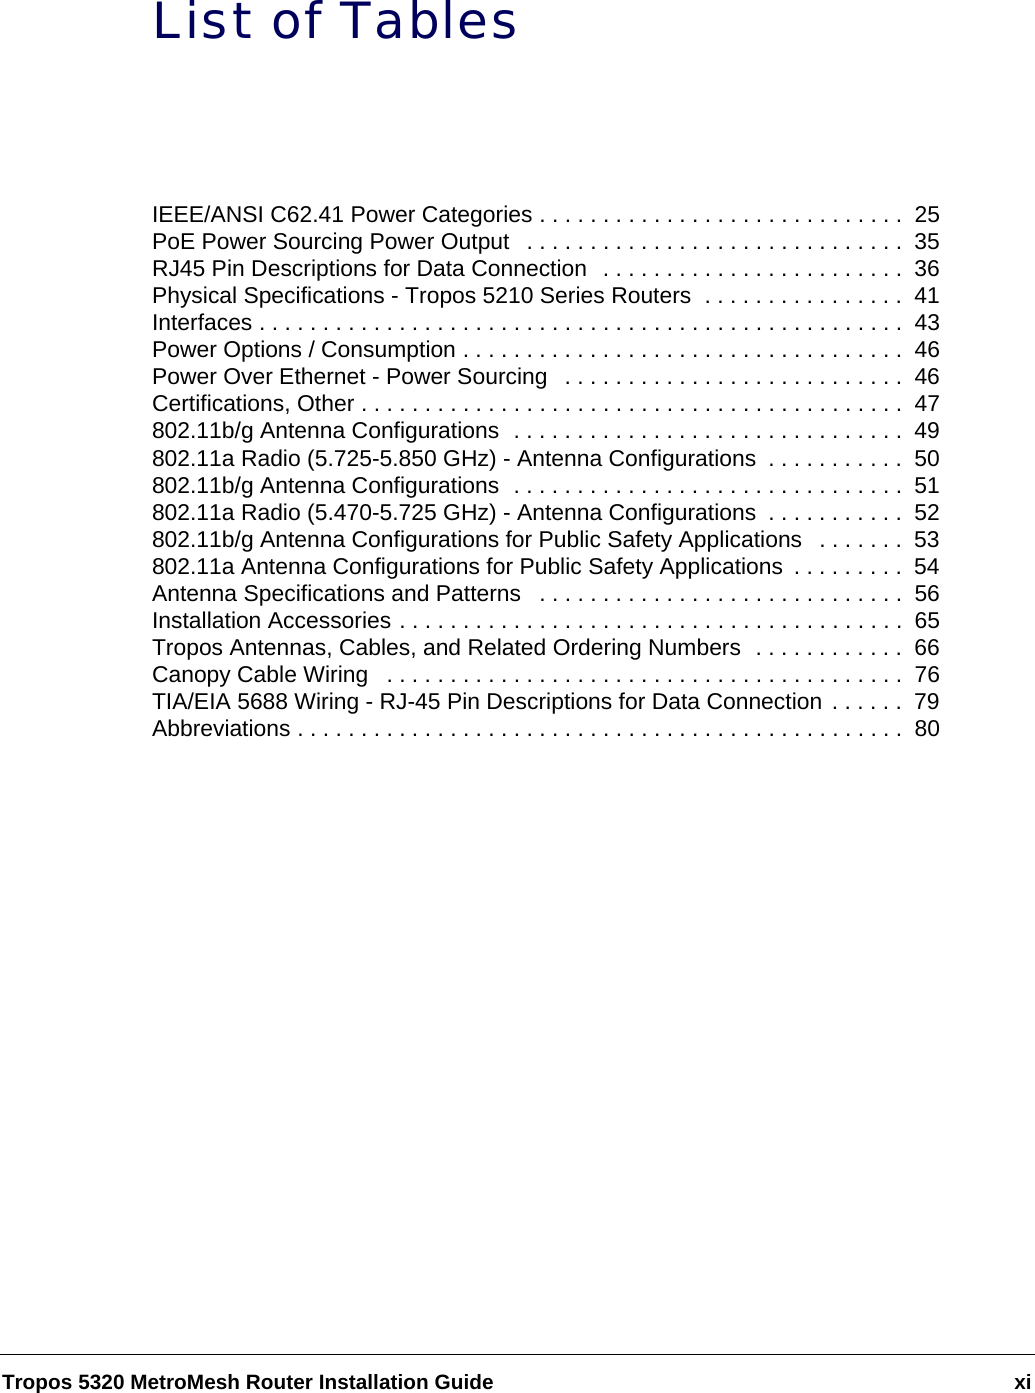 Tropos 5320 MetroMesh Router Installation Guide xiList of TablesIEEE/ANSI C62.41 Power Categories . . . . . . . . . . . . . . . . . . . . . . . . . . . . .  25PoE Power Sourcing Power Output   . . . . . . . . . . . . . . . . . . . . . . . . . . . . . .  35RJ45 Pin Descriptions for Data Connection  . . . . . . . . . . . . . . . . . . . . . . . .  36Physical Specifications - Tropos 5210 Series Routers  . . . . . . . . . . . . . . . .  41Interfaces . . . . . . . . . . . . . . . . . . . . . . . . . . . . . . . . . . . . . . . . . . . . . . . . . . .  43Power Options / Consumption . . . . . . . . . . . . . . . . . . . . . . . . . . . . . . . . . . .  46Power Over Ethernet - Power Sourcing   . . . . . . . . . . . . . . . . . . . . . . . . . . .  46Certifications, Other . . . . . . . . . . . . . . . . . . . . . . . . . . . . . . . . . . . . . . . . . . .  47802.11b/g Antenna Configurations  . . . . . . . . . . . . . . . . . . . . . . . . . . . . . . .  49802.11a Radio (5.725-5.850 GHz) - Antenna Configurations  . . . . . . . . . . .  50802.11b/g Antenna Configurations  . . . . . . . . . . . . . . . . . . . . . . . . . . . . . . .  51802.11a Radio (5.470-5.725 GHz) - Antenna Configurations  . . . . . . . . . . .  52802.11b/g Antenna Configurations for Public Safety Applications   . . . . . . .  53802.11a Antenna Configurations for Public Safety Applications  . . . . . . . . .  54Antenna Specifications and Patterns   . . . . . . . . . . . . . . . . . . . . . . . . . . . . .  56Installation Accessories . . . . . . . . . . . . . . . . . . . . . . . . . . . . . . . . . . . . . . . .  65Tropos Antennas, Cables, and Related Ordering Numbers  . . . . . . . . . . . .  66Canopy Cable Wiring   . . . . . . . . . . . . . . . . . . . . . . . . . . . . . . . . . . . . . . . . .  76TIA/EIA 5688 Wiring - RJ-45 Pin Descriptions for Data Connection . . . . . .  79Abbreviations . . . . . . . . . . . . . . . . . . . . . . . . . . . . . . . . . . . . . . . . . . . . . . . .  80